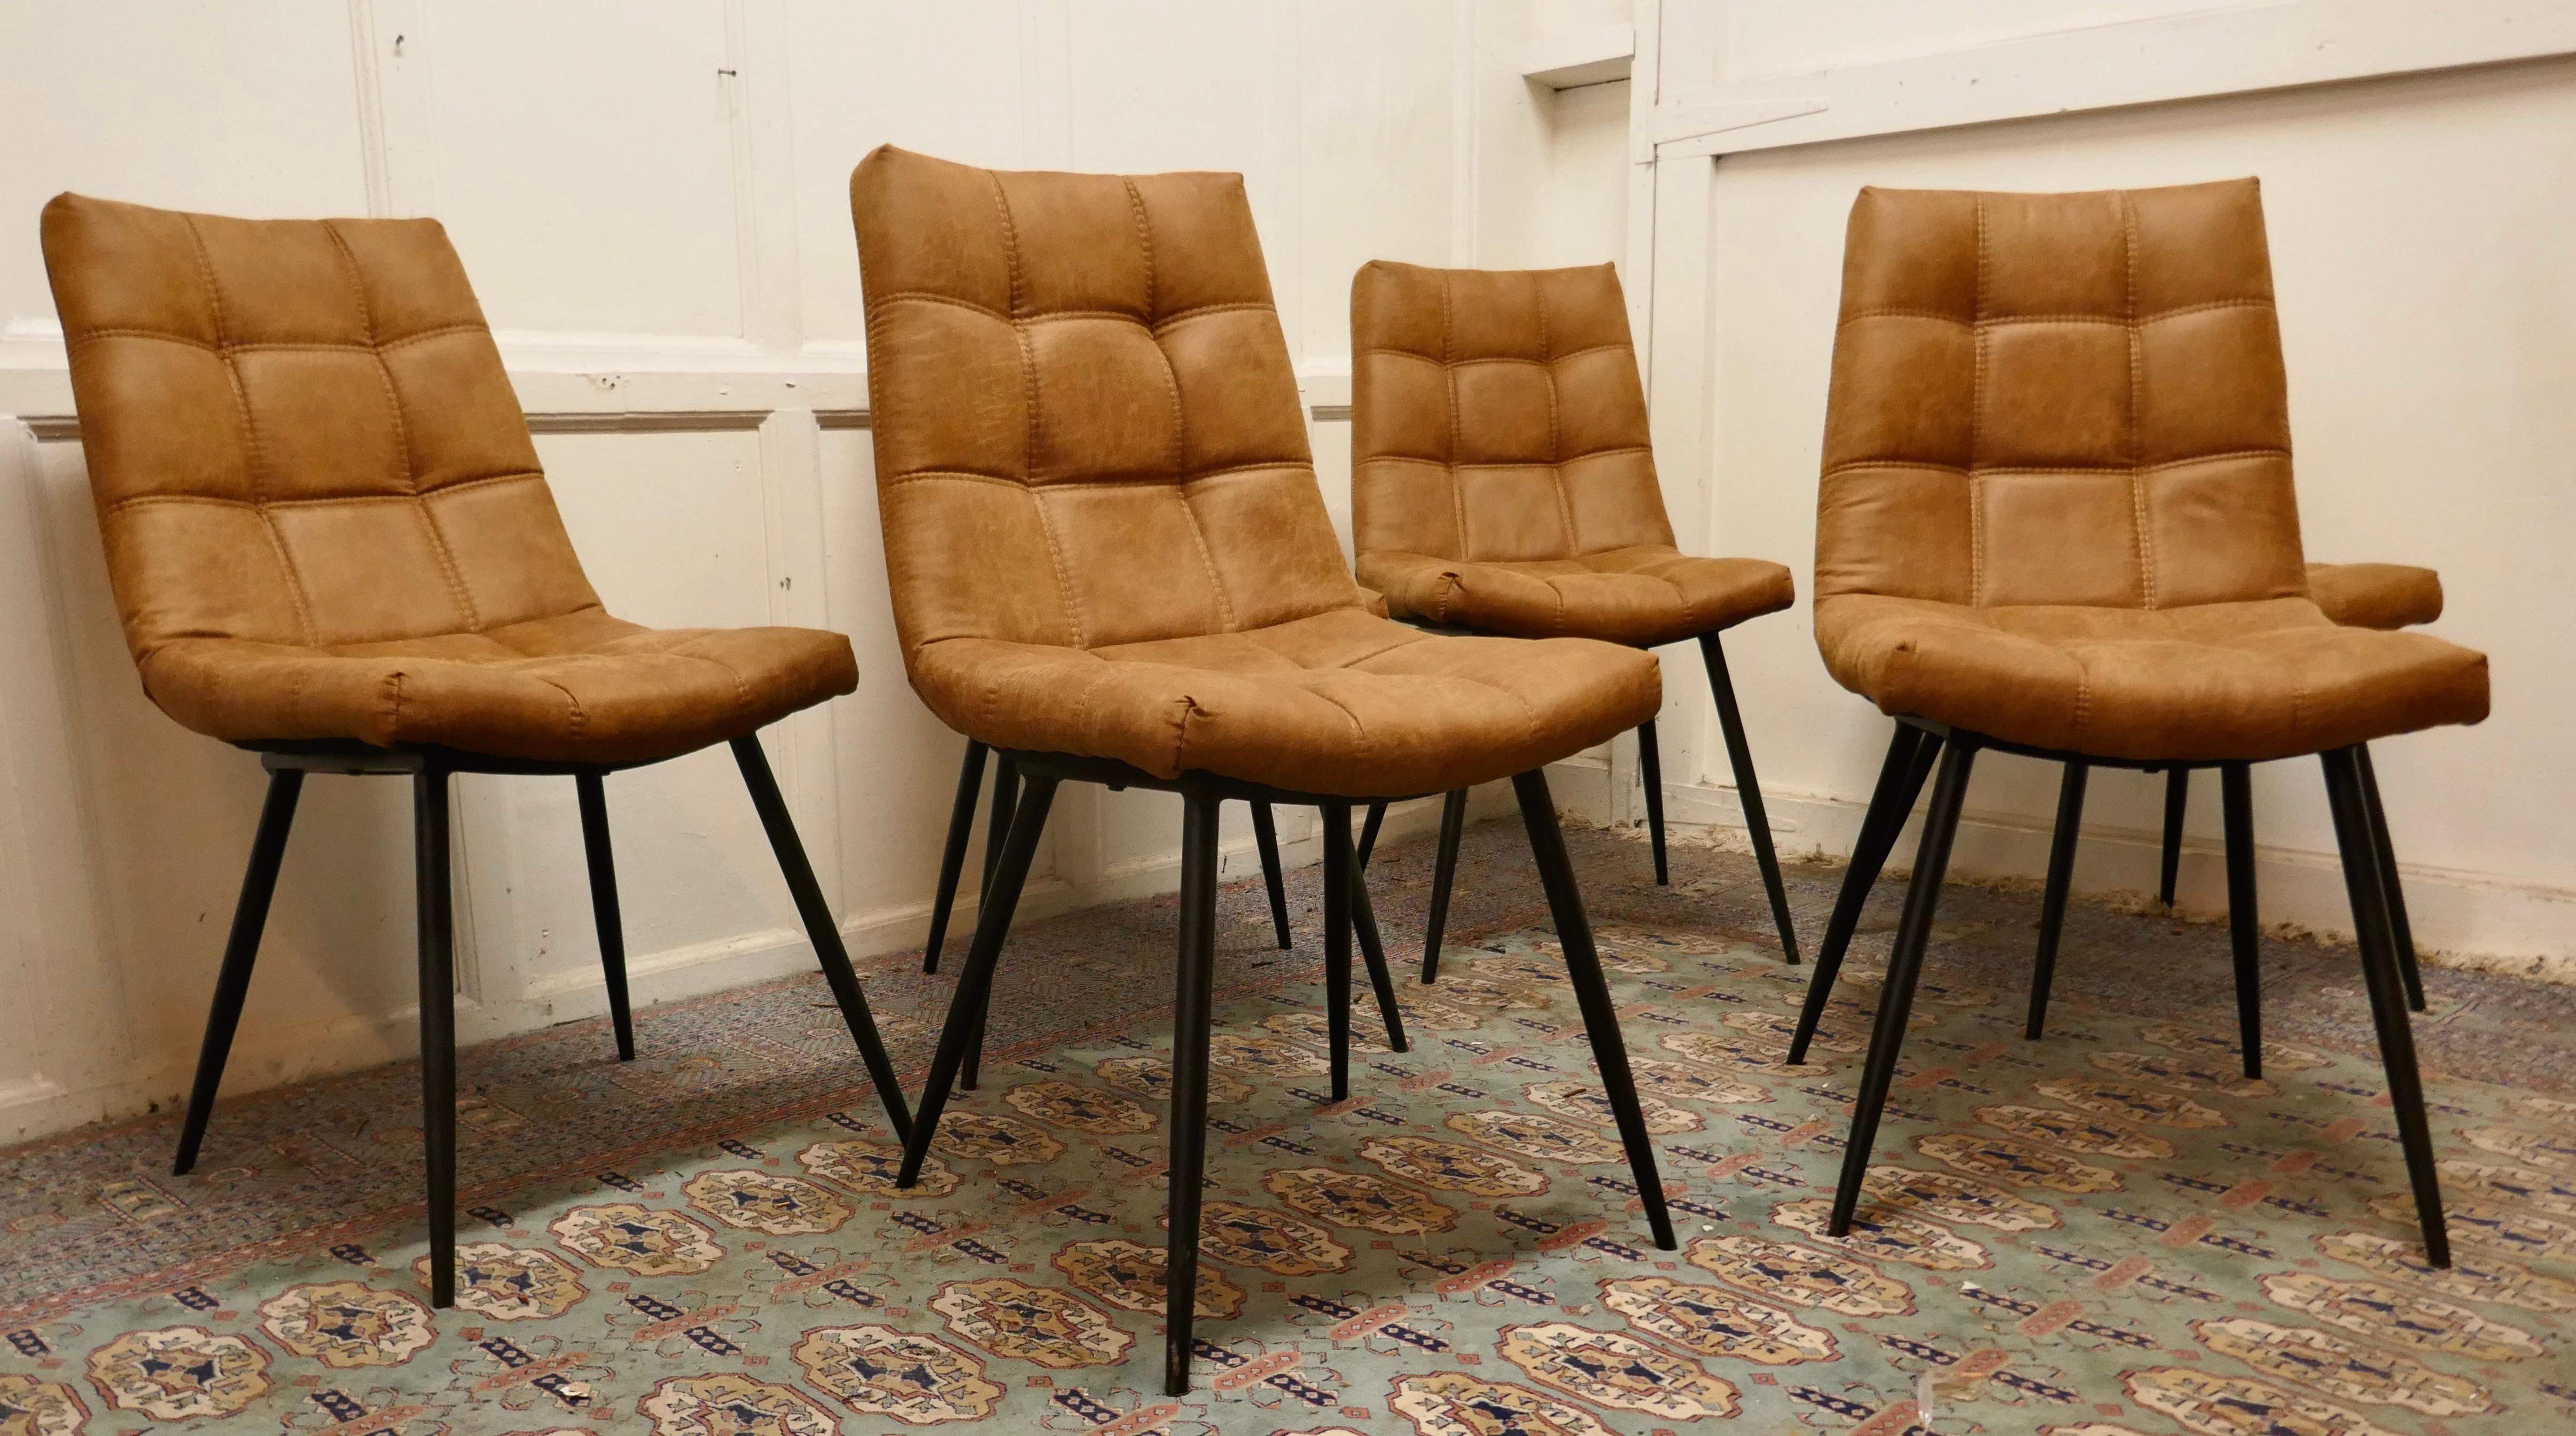 upholstered dining chairs set of 6